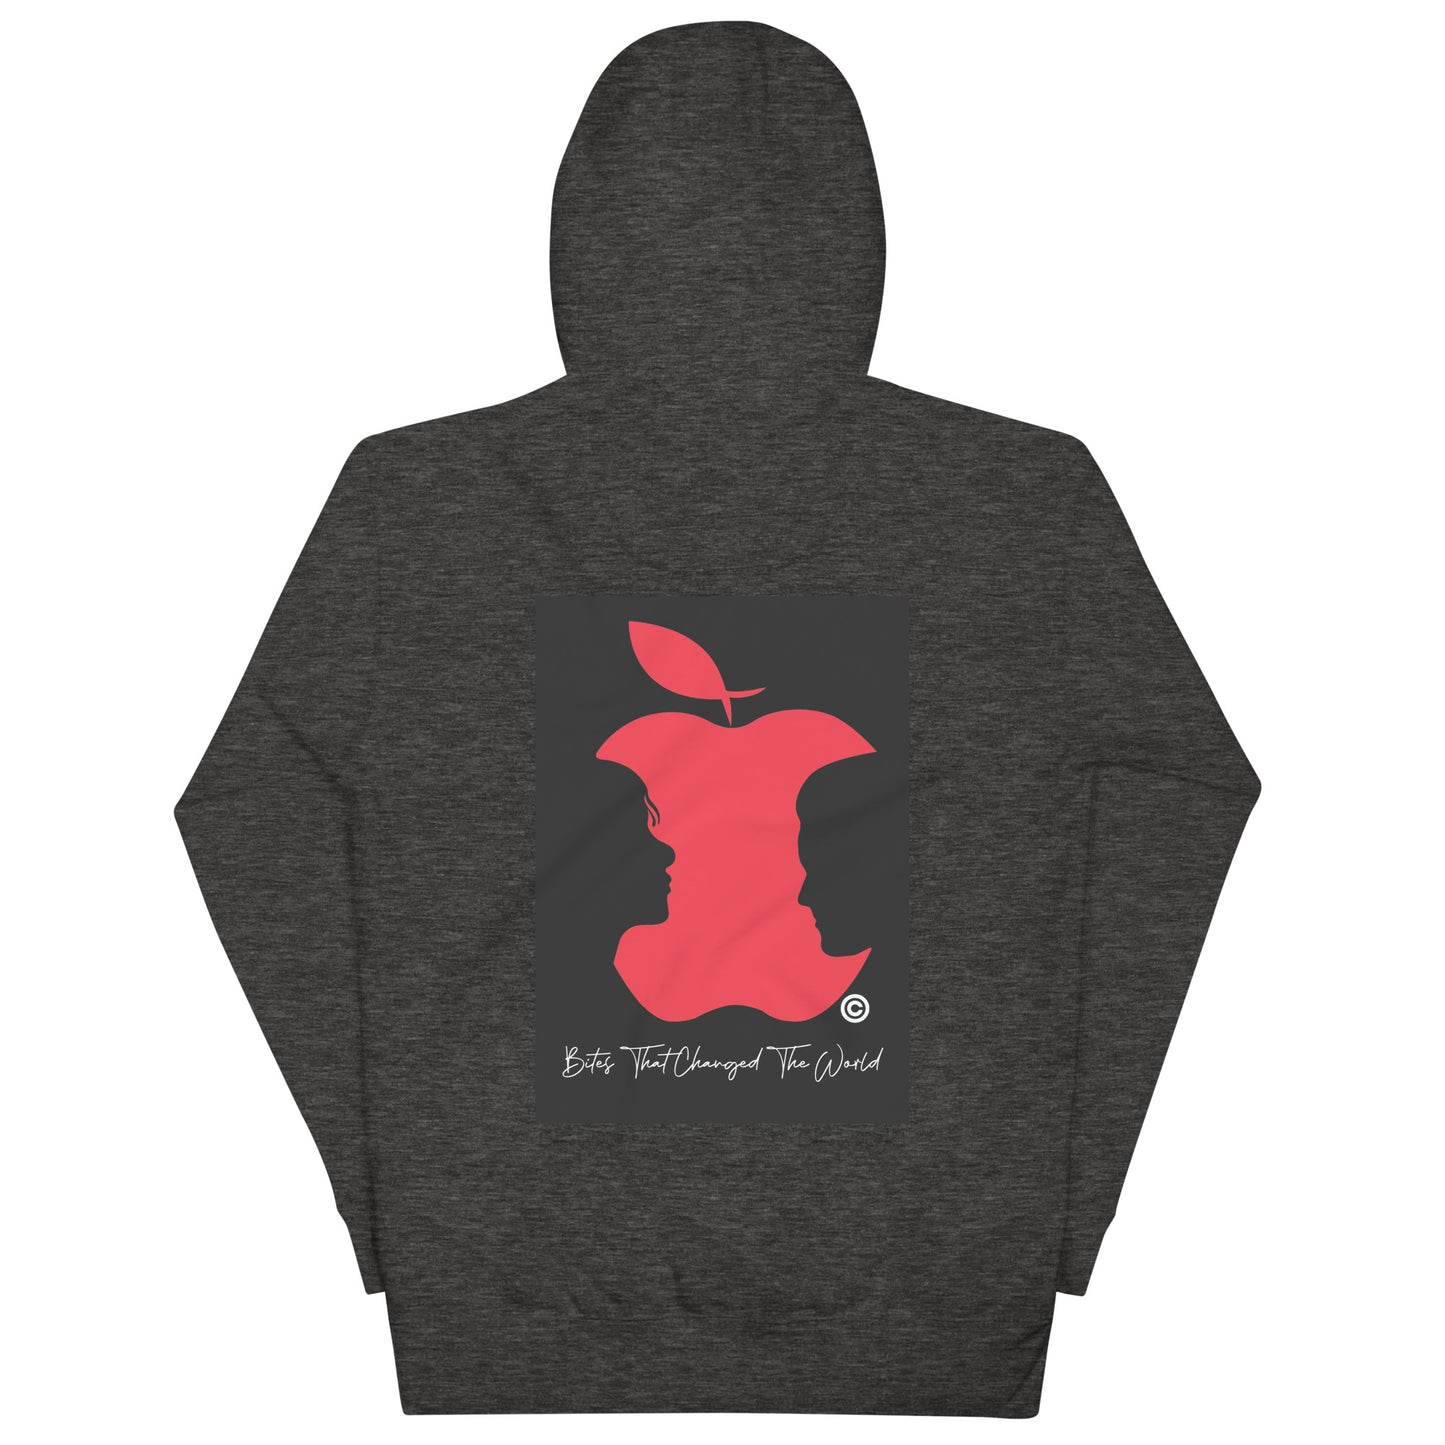 Bites That Changed the World Women's Hoodie